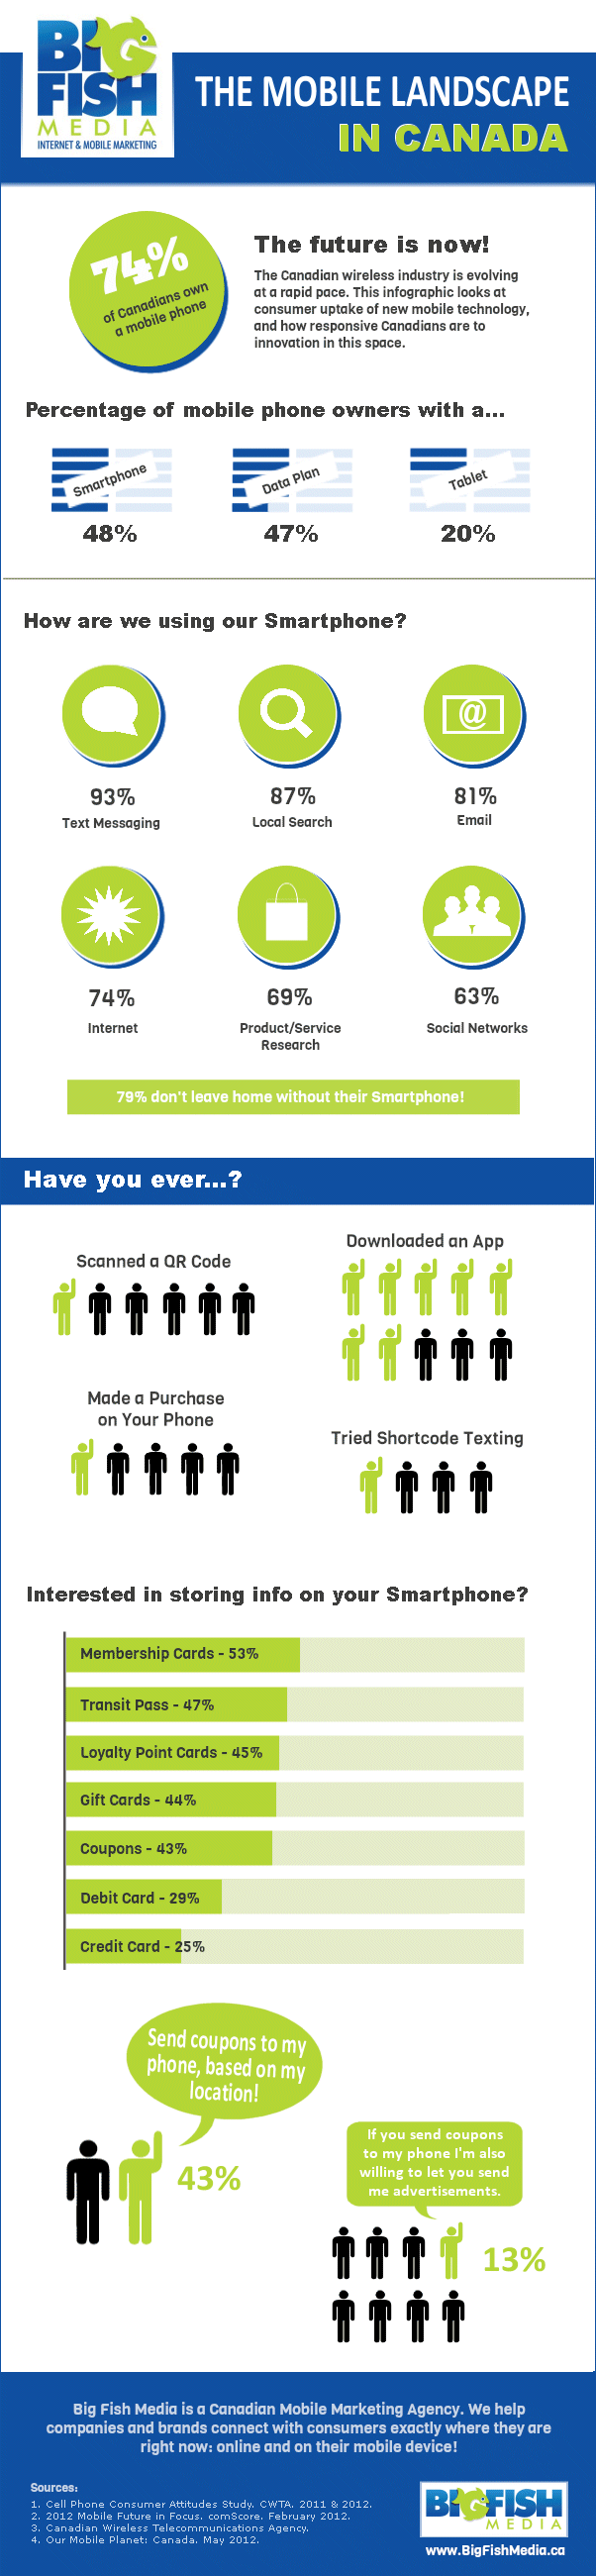 The Mobile Landscape in Canada Infographic